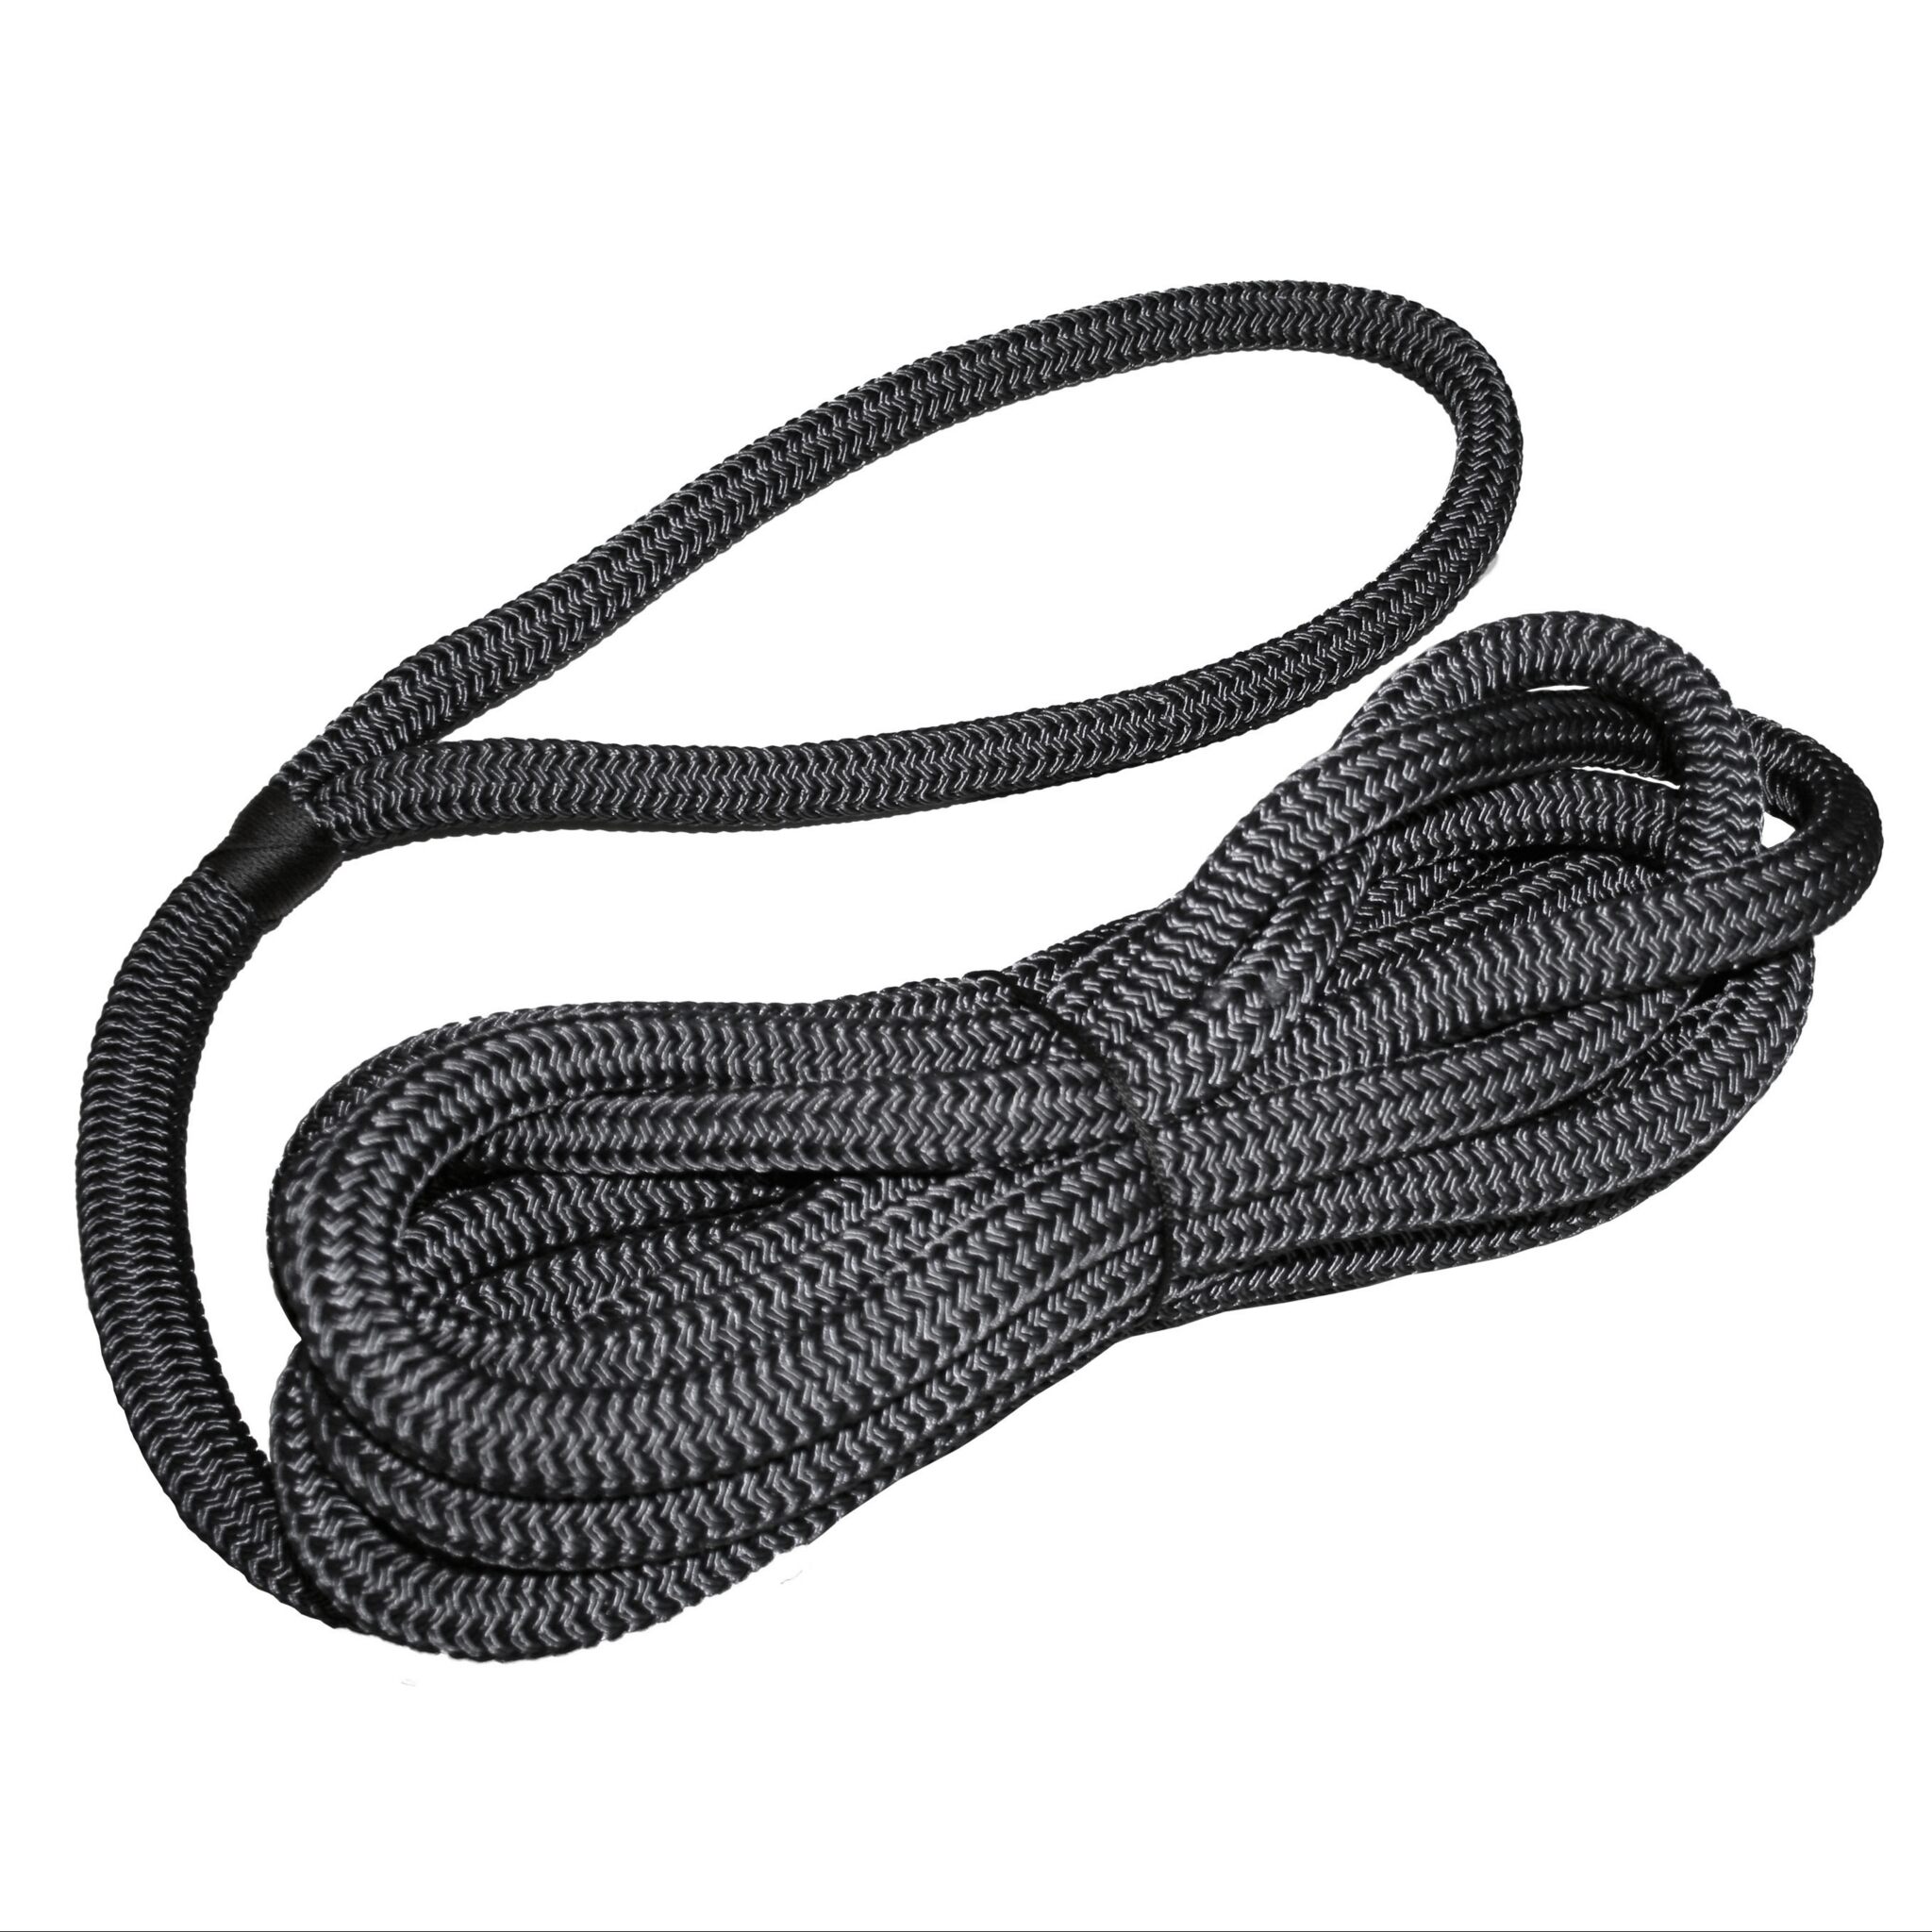 awn mooring rope professional